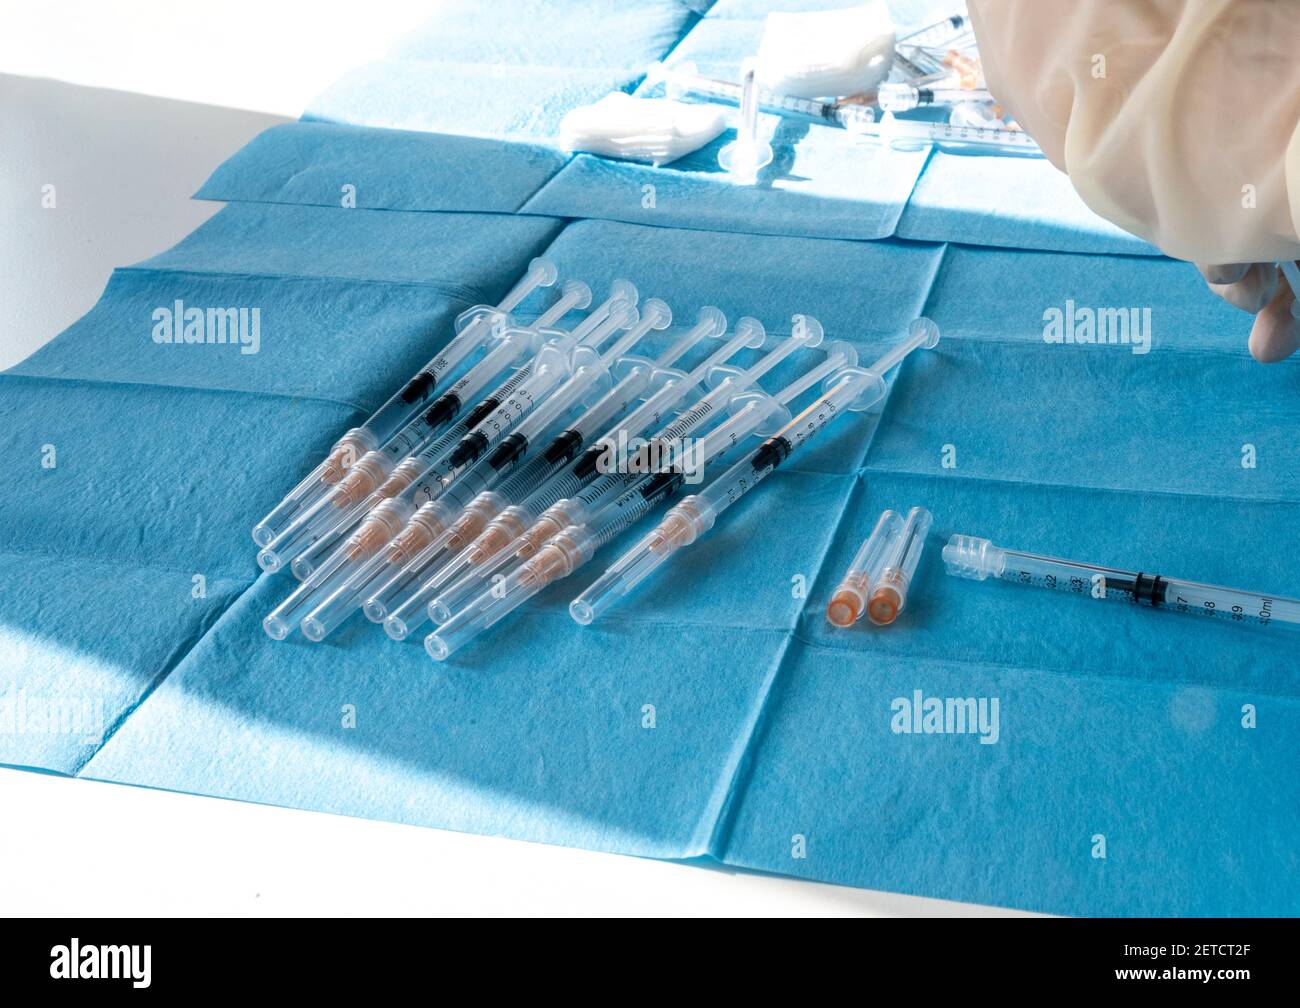 Medical worker prepare an injection of vaccine during a massive vaccination day at a healthcare centre.  Syringes in preparation and ready to use. Stock Photo